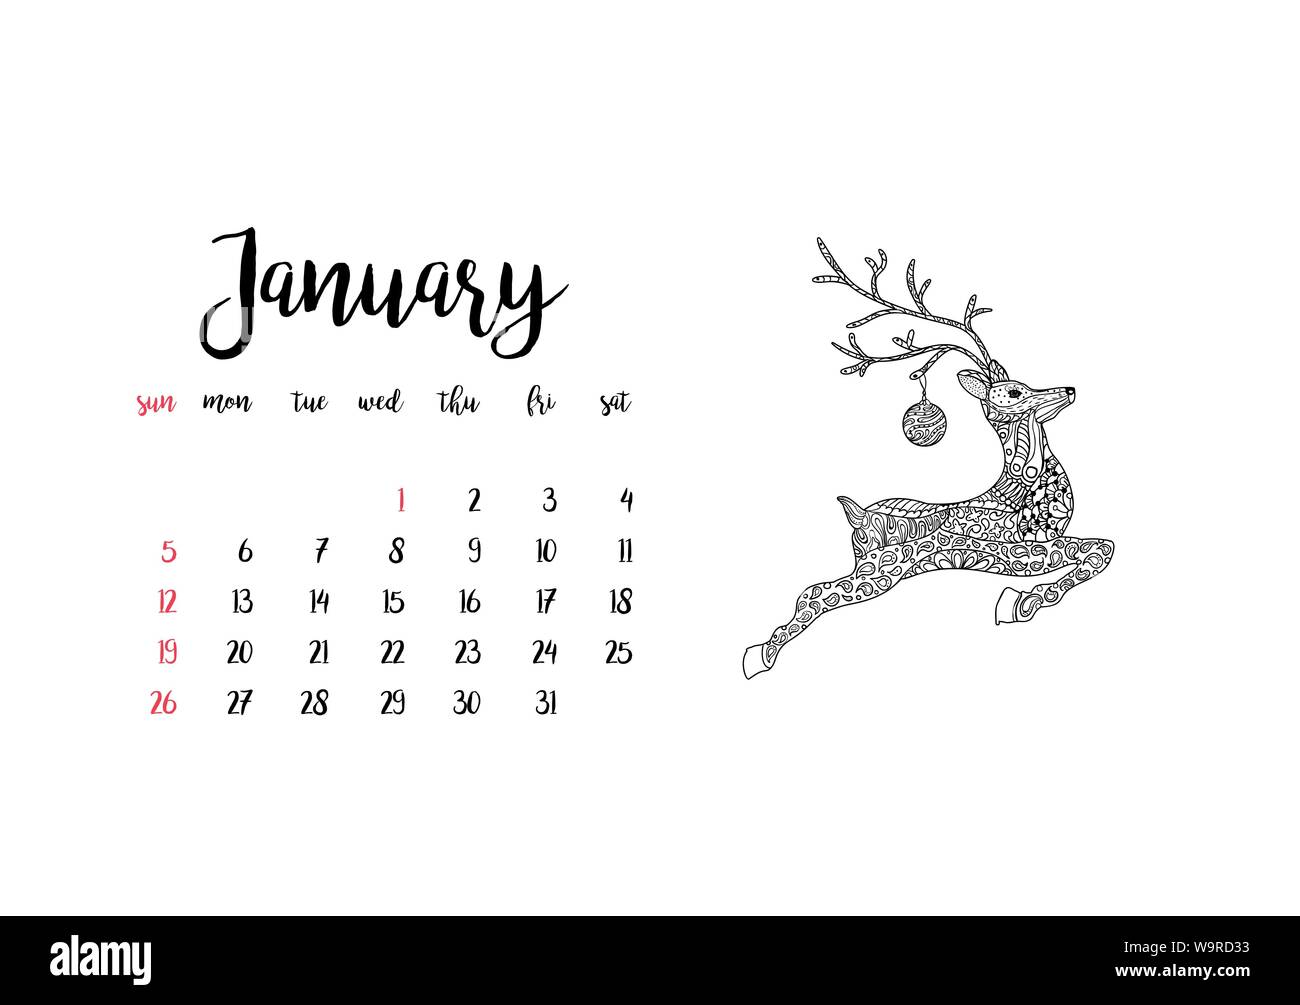 monthly-desk-calendar-horizontal-template-2020-for-month-january-week-starts-sunday-stock